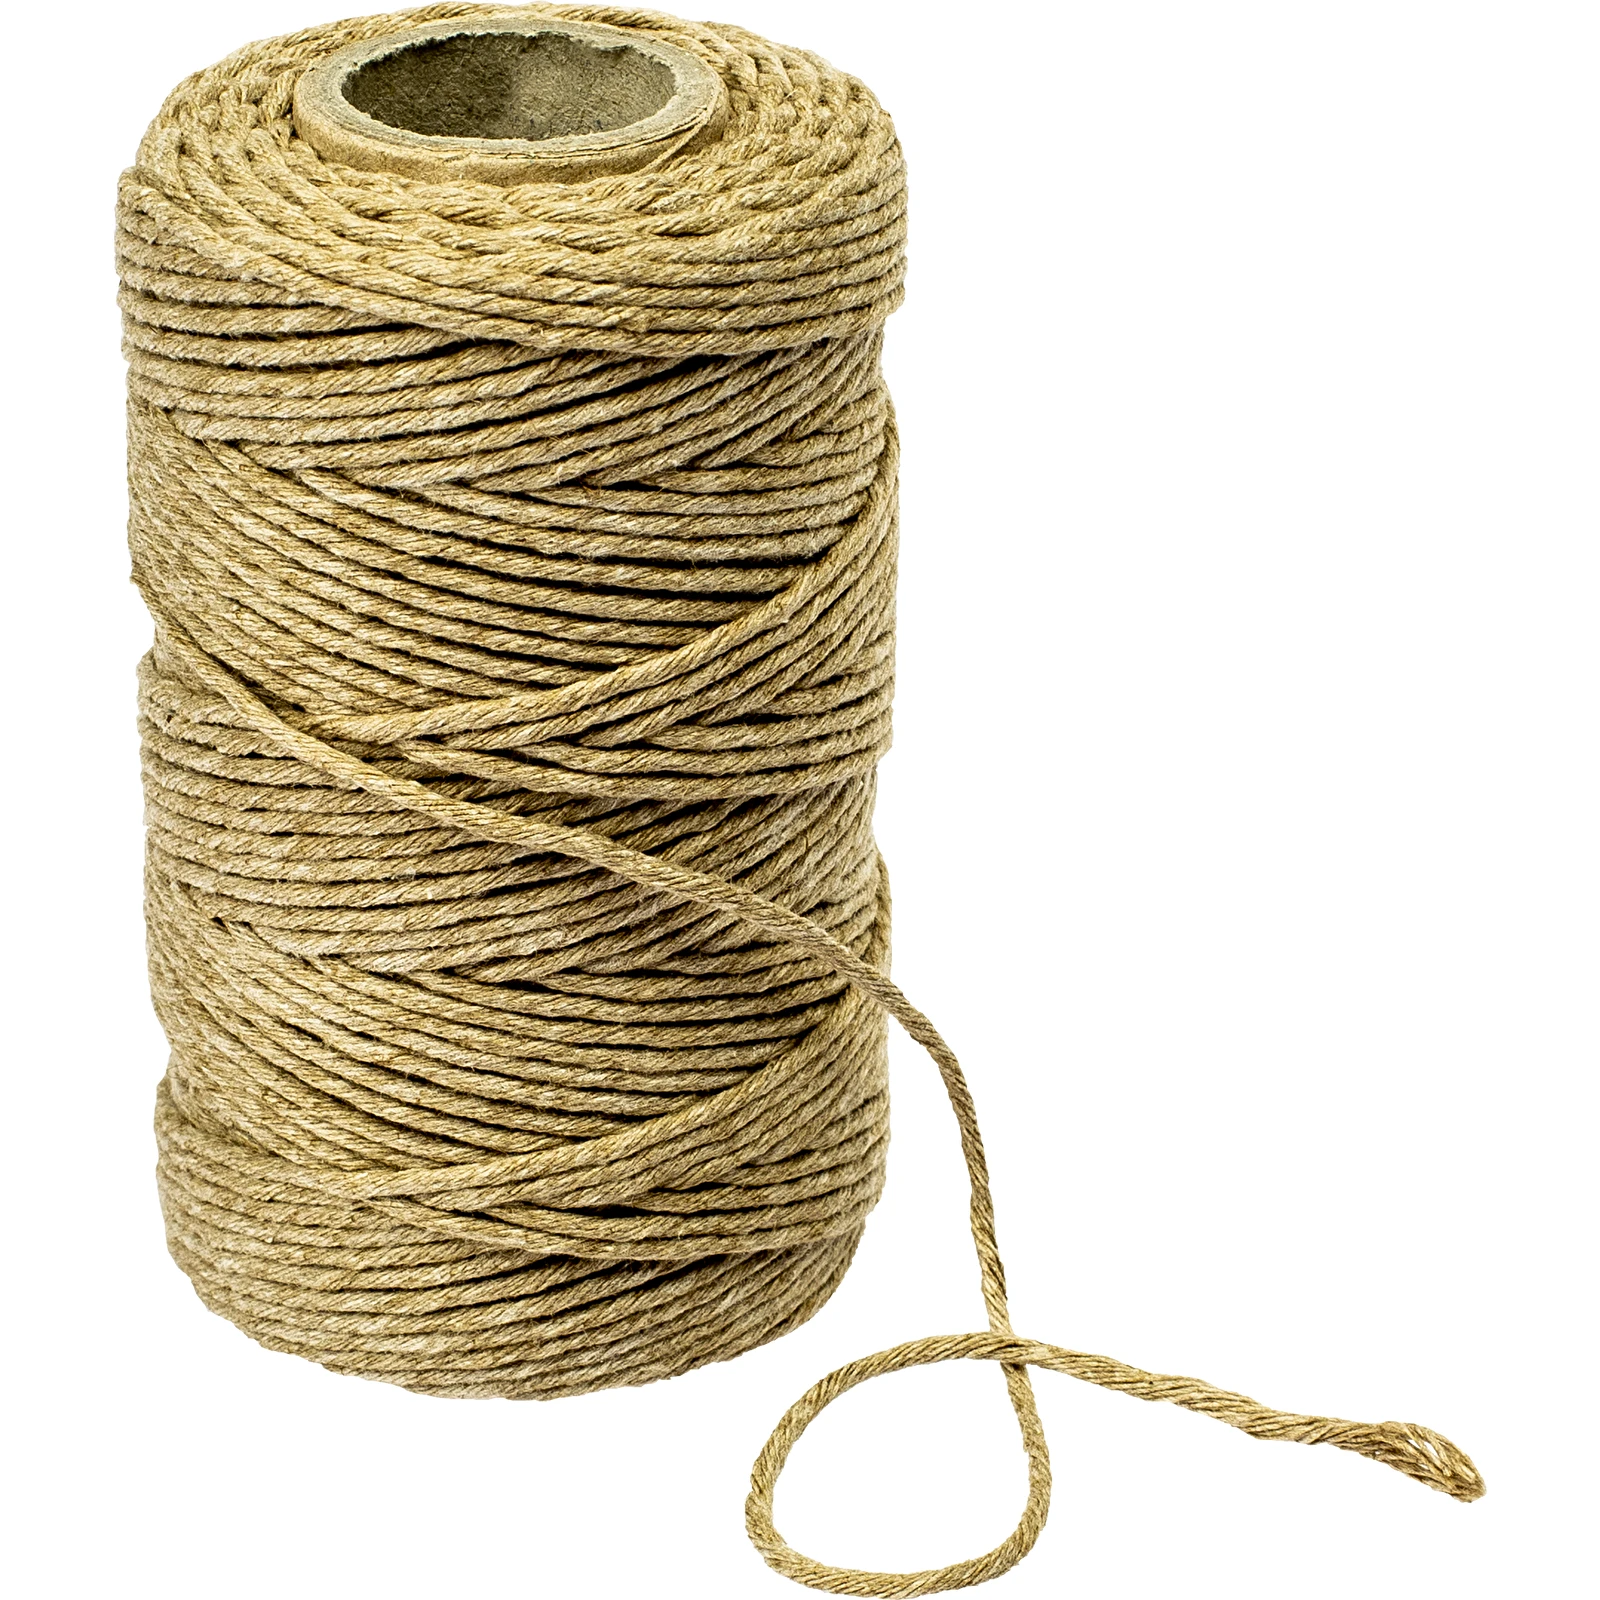 https://browin.com/static/images/1600/grey-cotton-twine-string-for-meat-tying-240-c-75-m-310204.webp